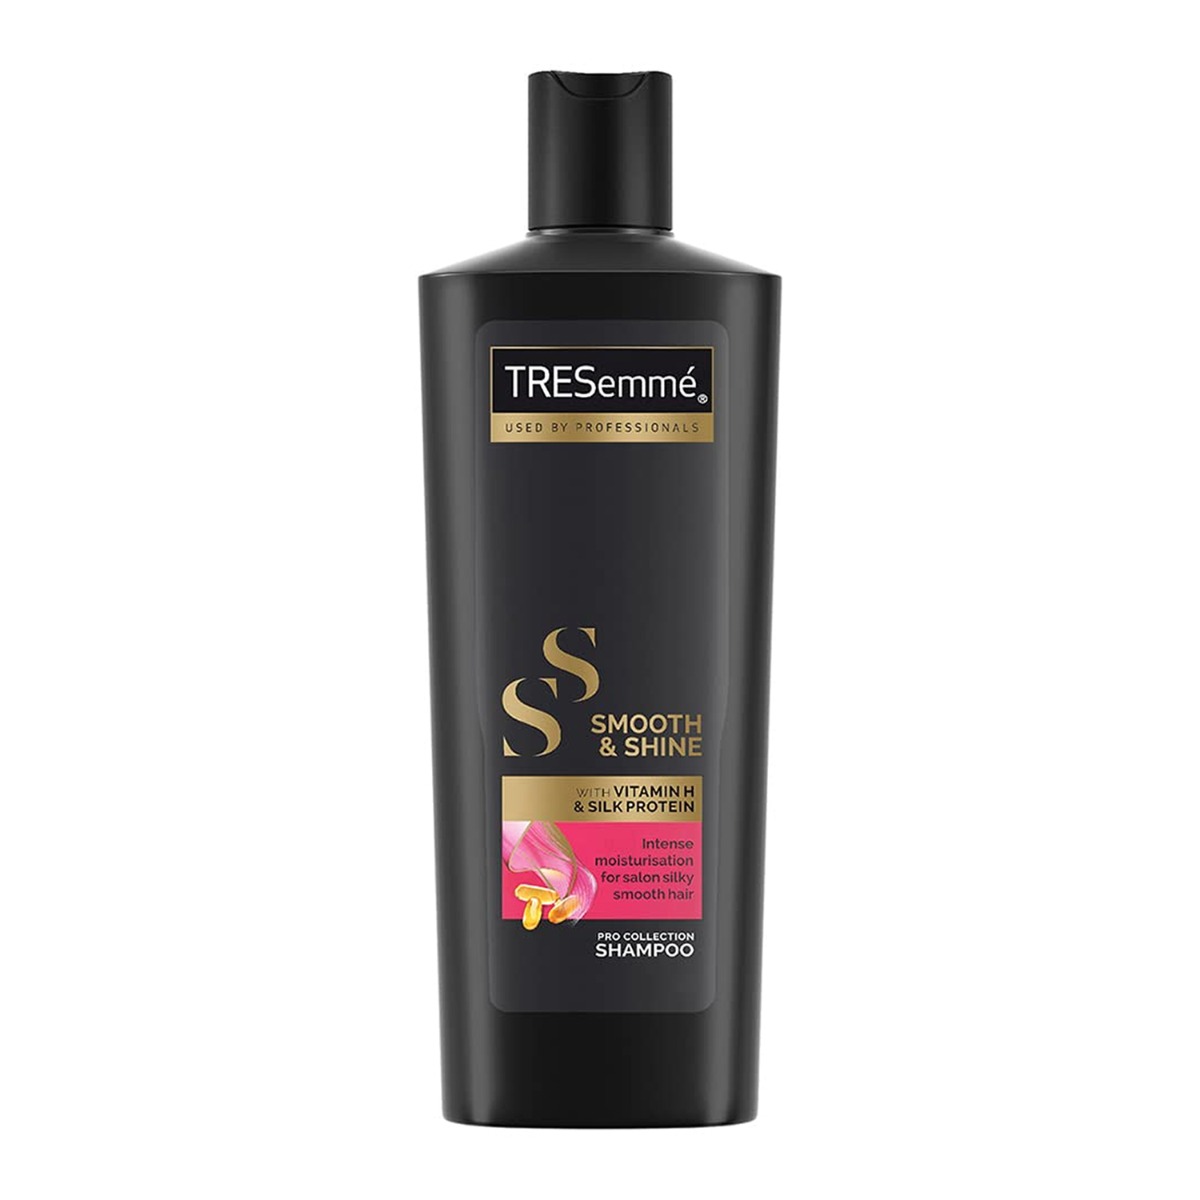 TRESemme Pro Collection Smooth & Shine Shampoo, 340ml